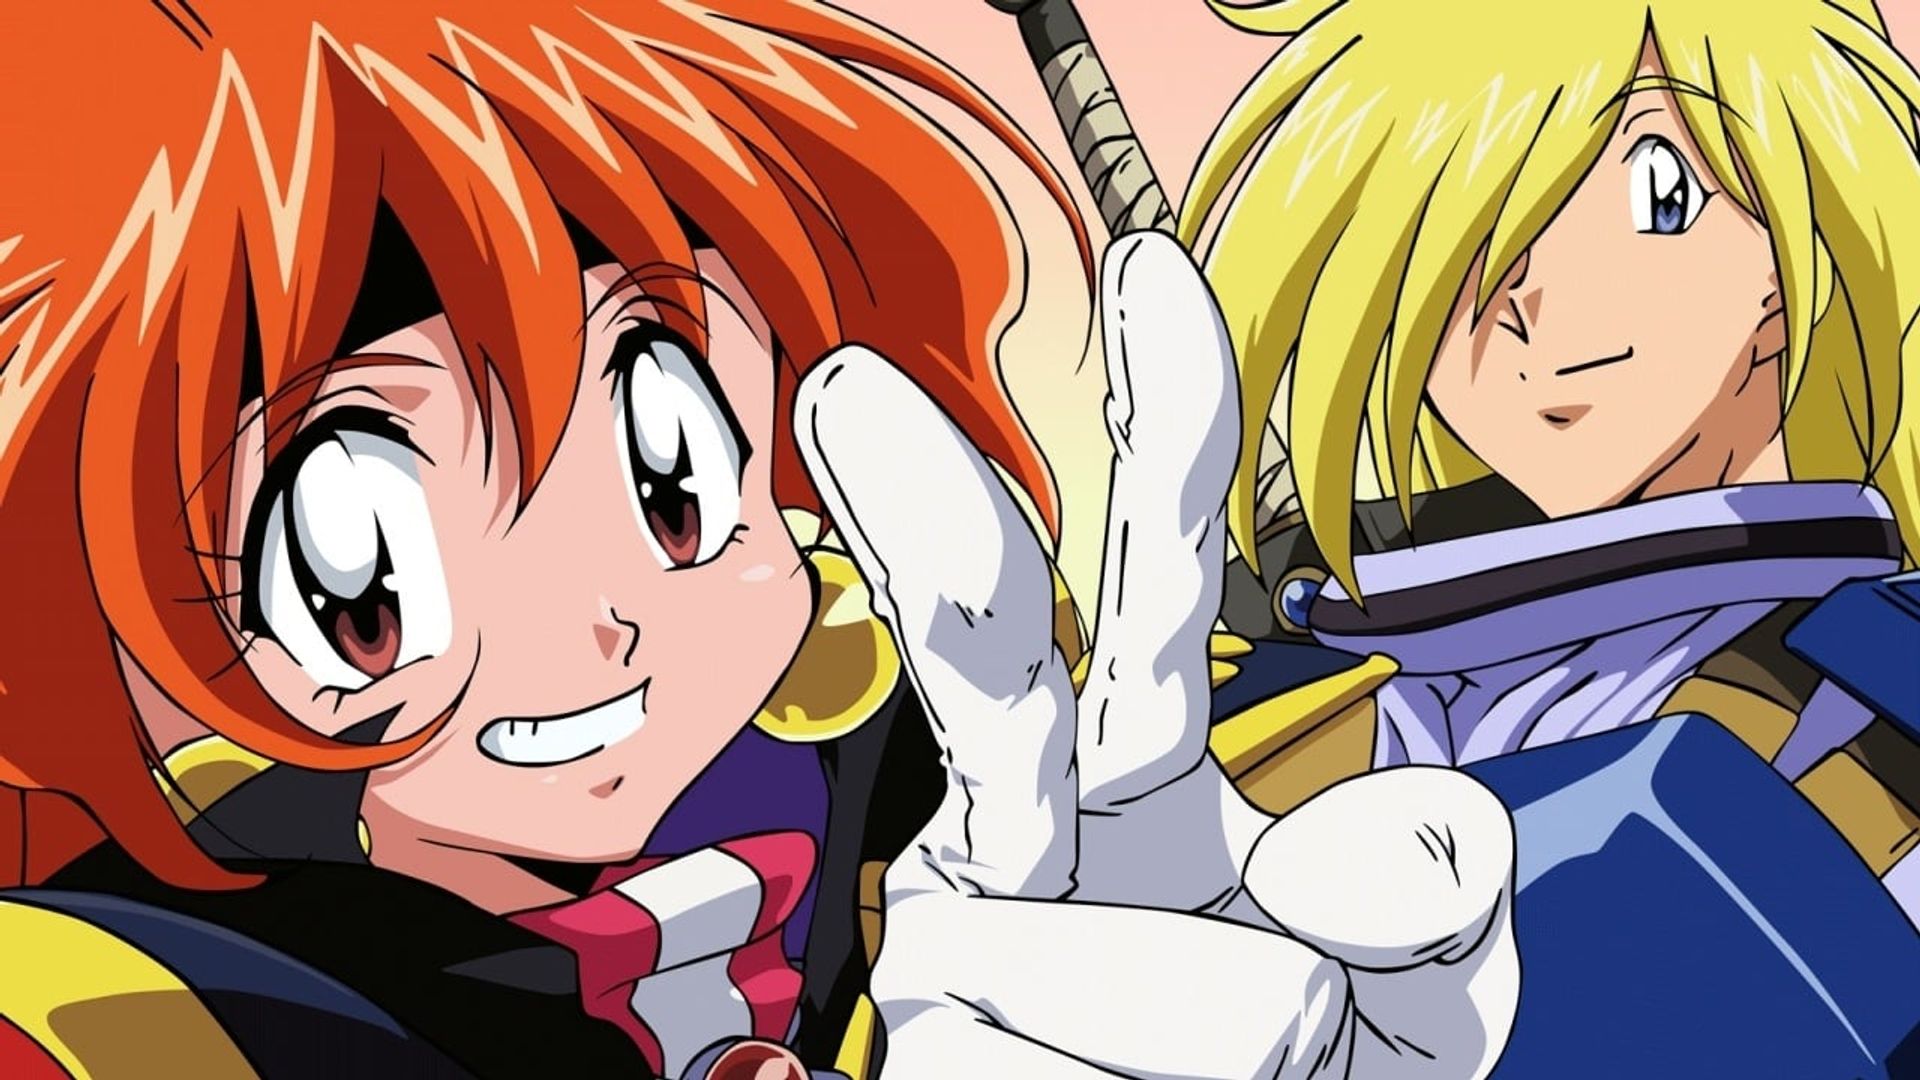 The Slayers - Watch Episodes on Funimation or Streaming Online | Reelgood